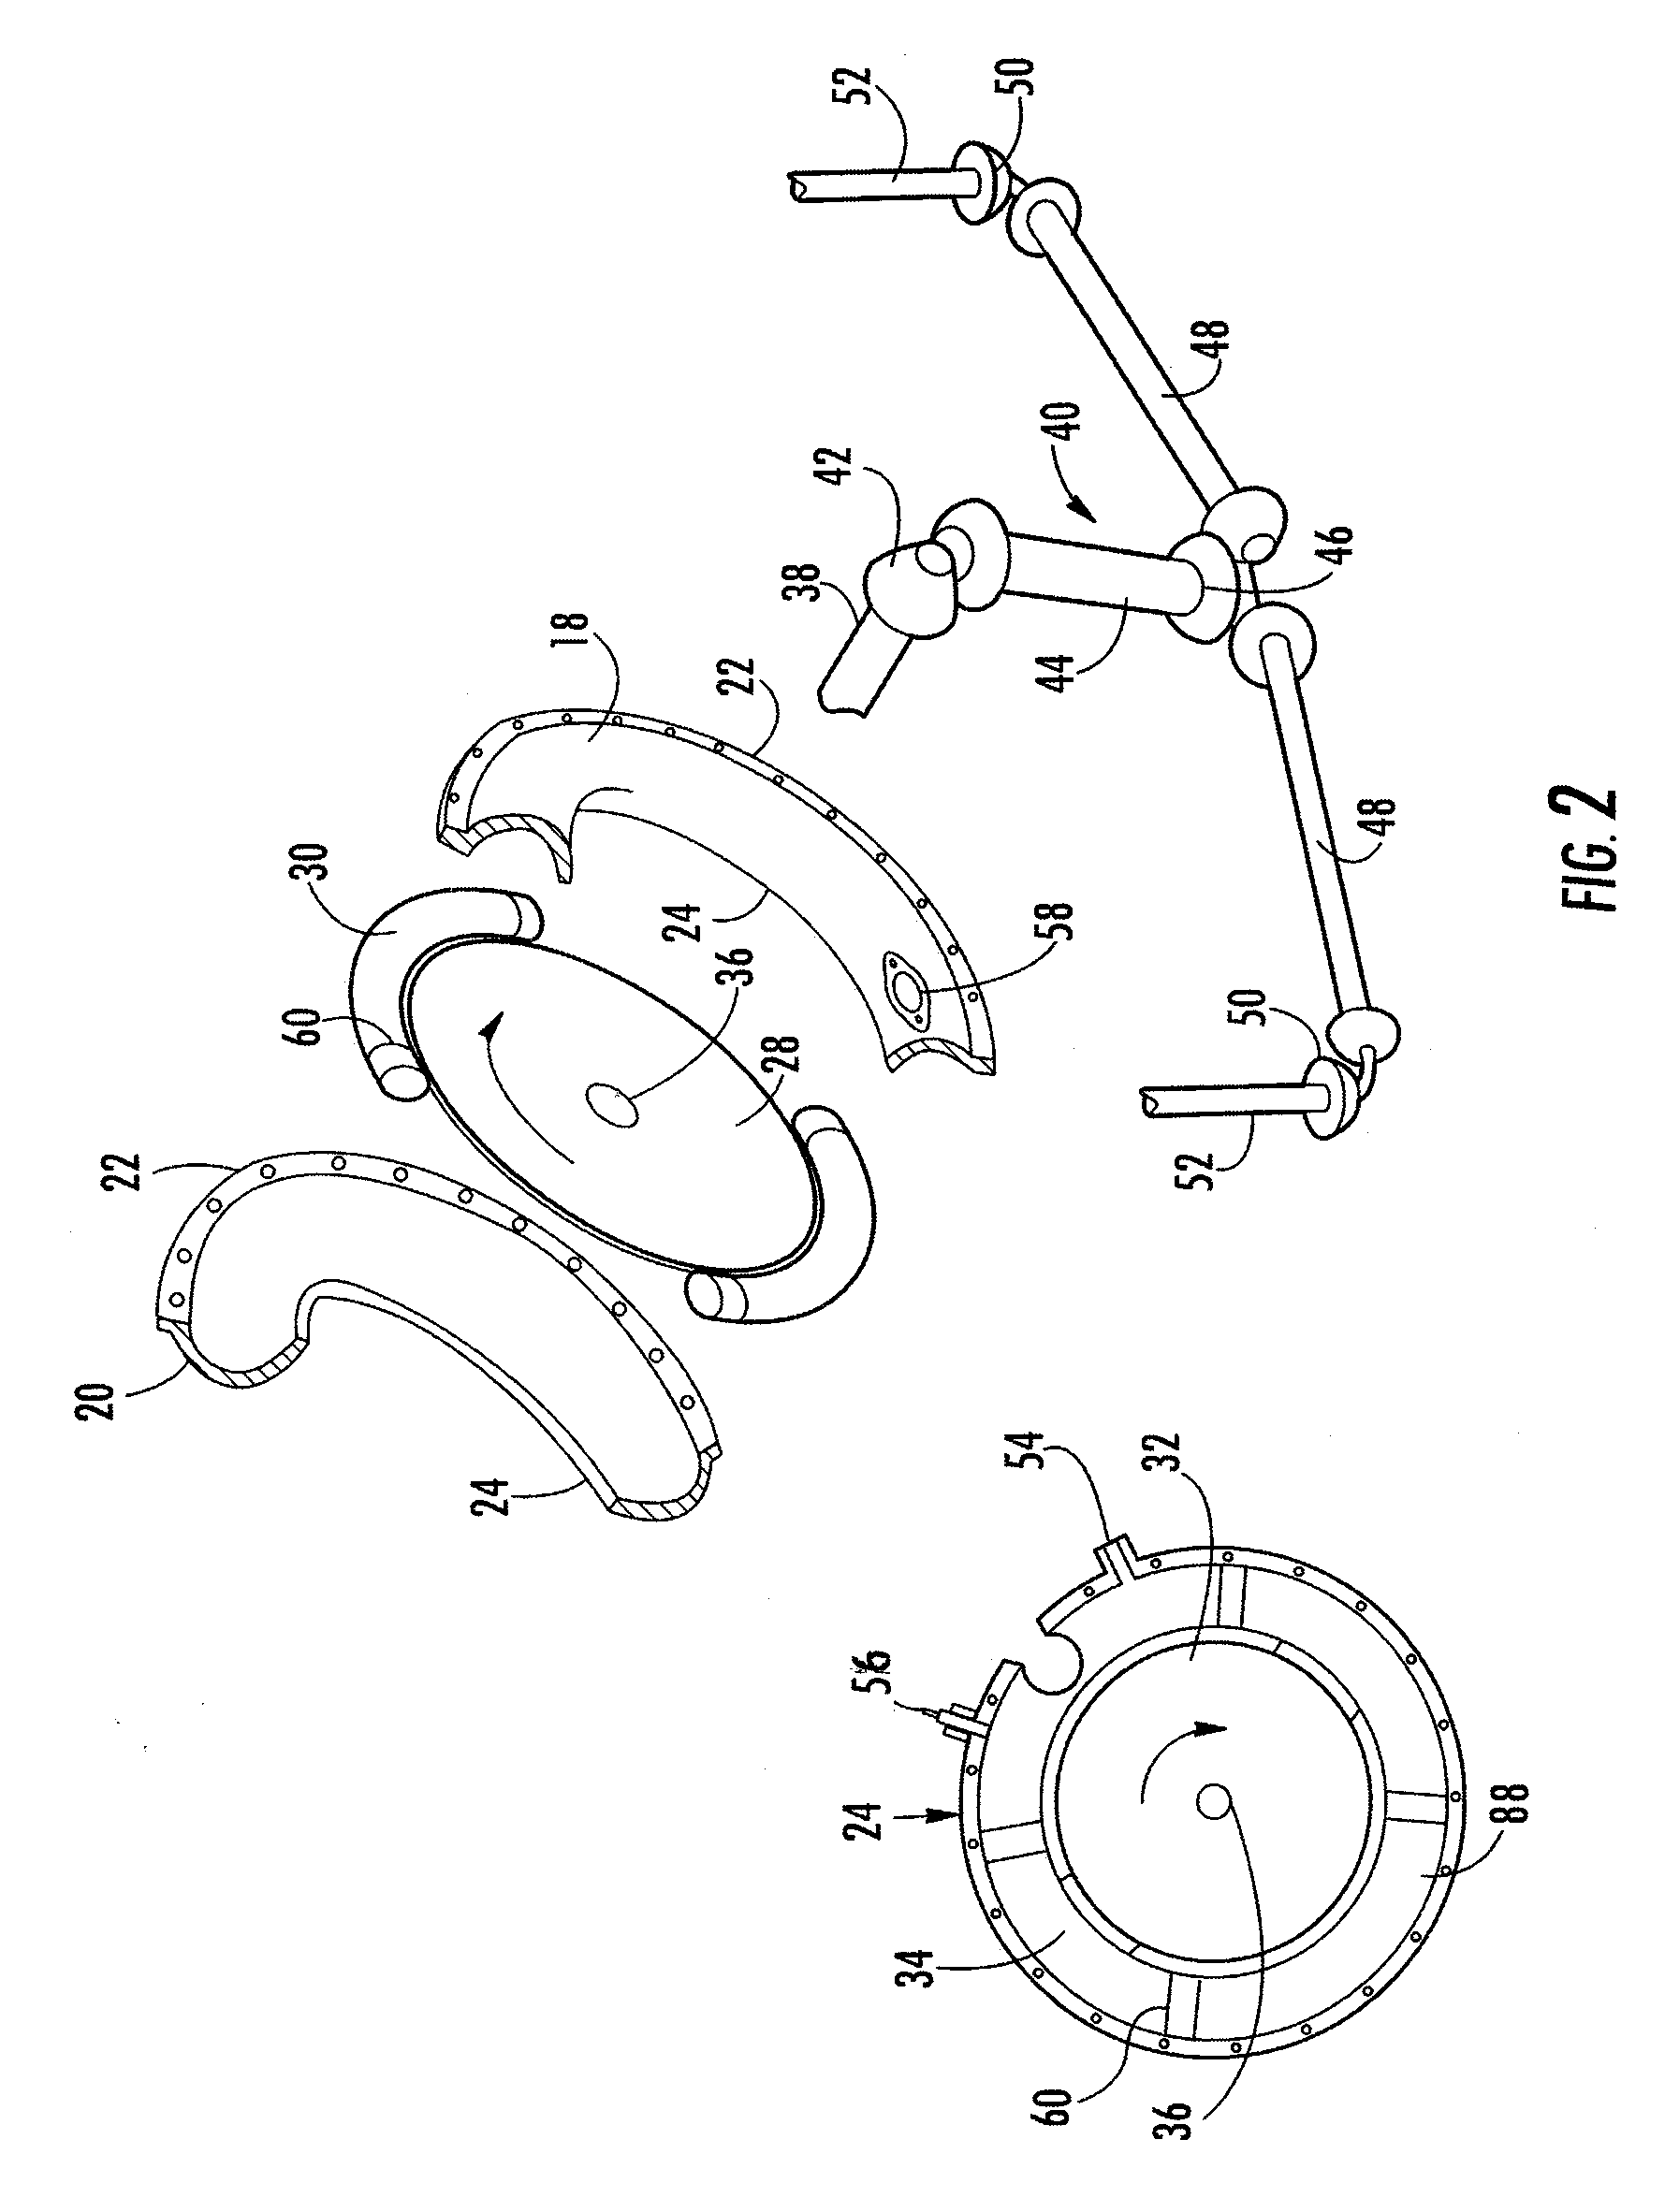 Internal combustion engine with toroidal cylinders